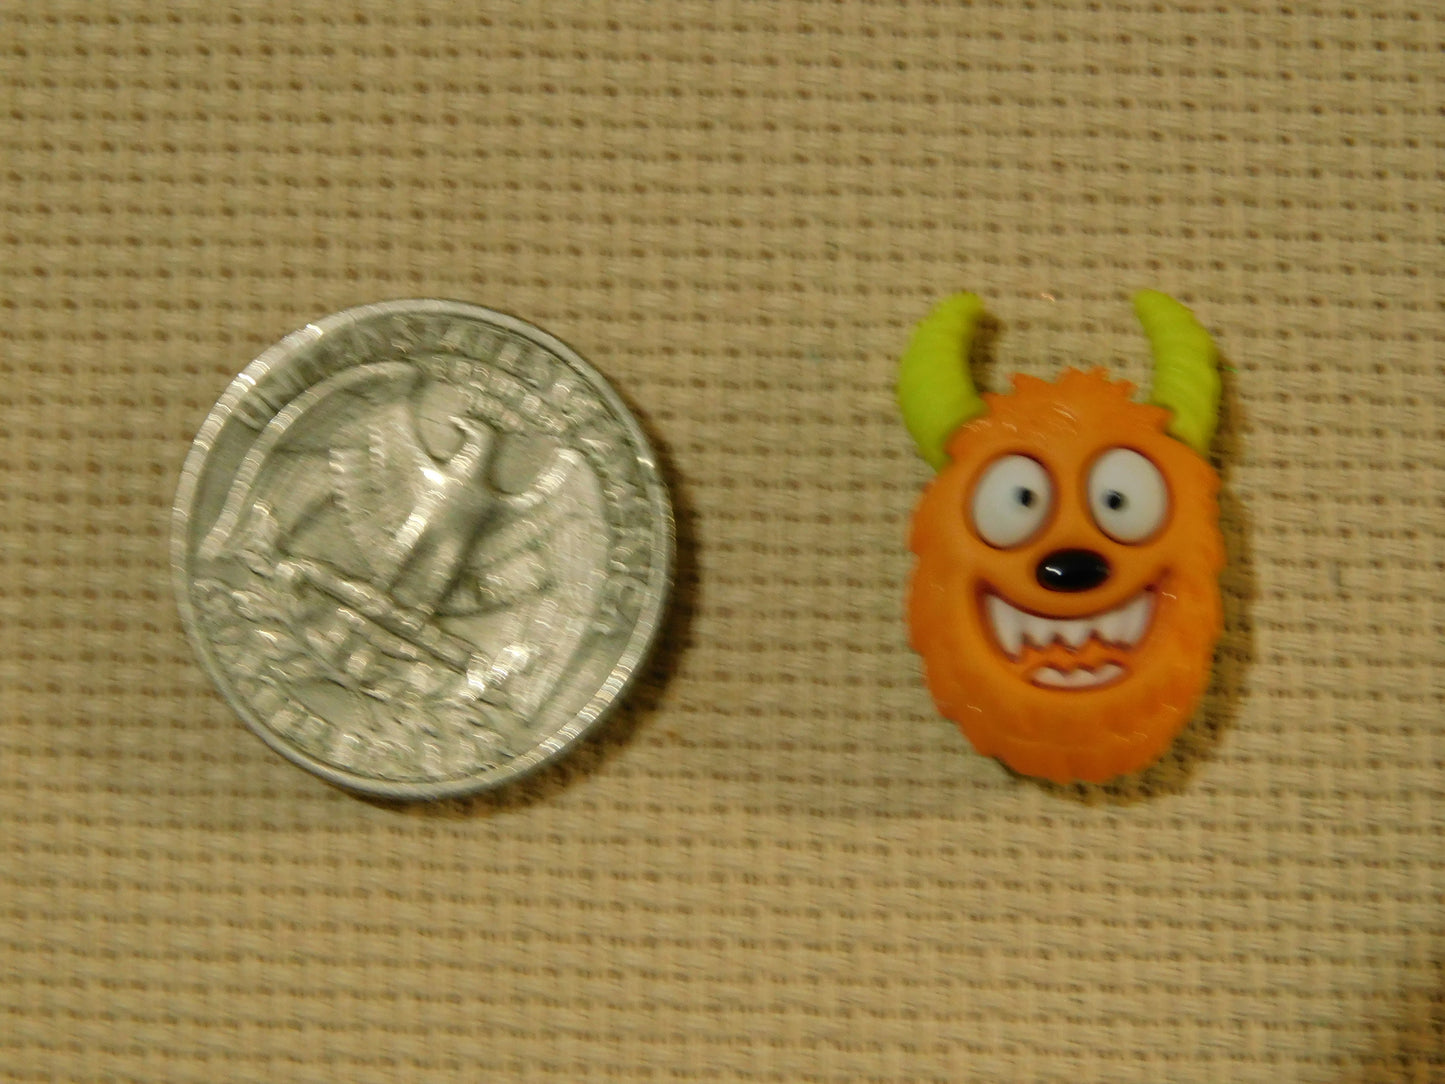 Silly Monster Faces needle minders